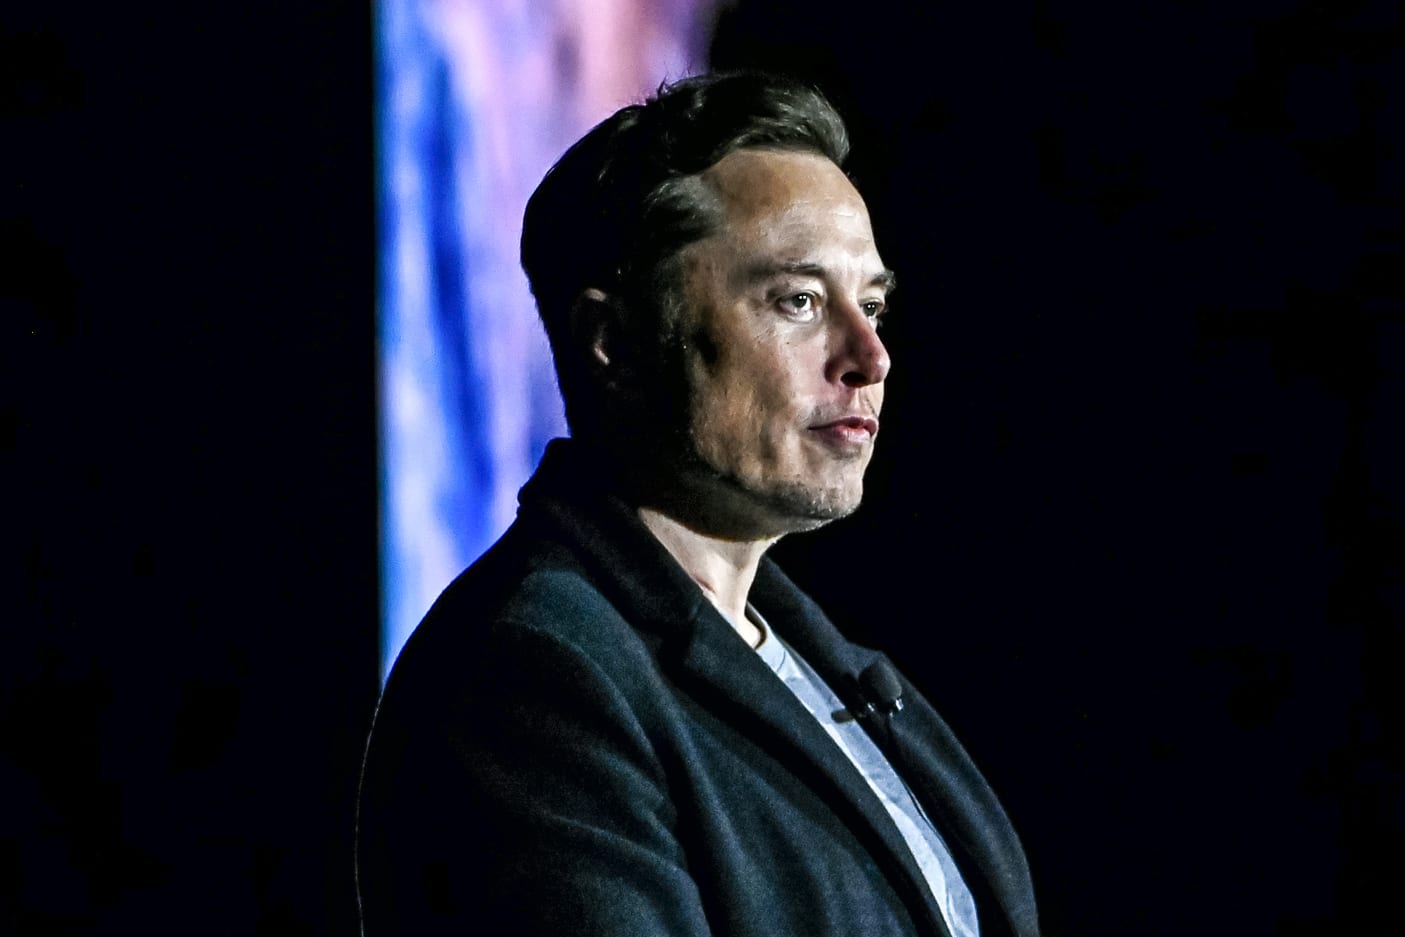 Twitter sues Elon Musk to force him to buy the company — while accusing him of ‘trashing’ it